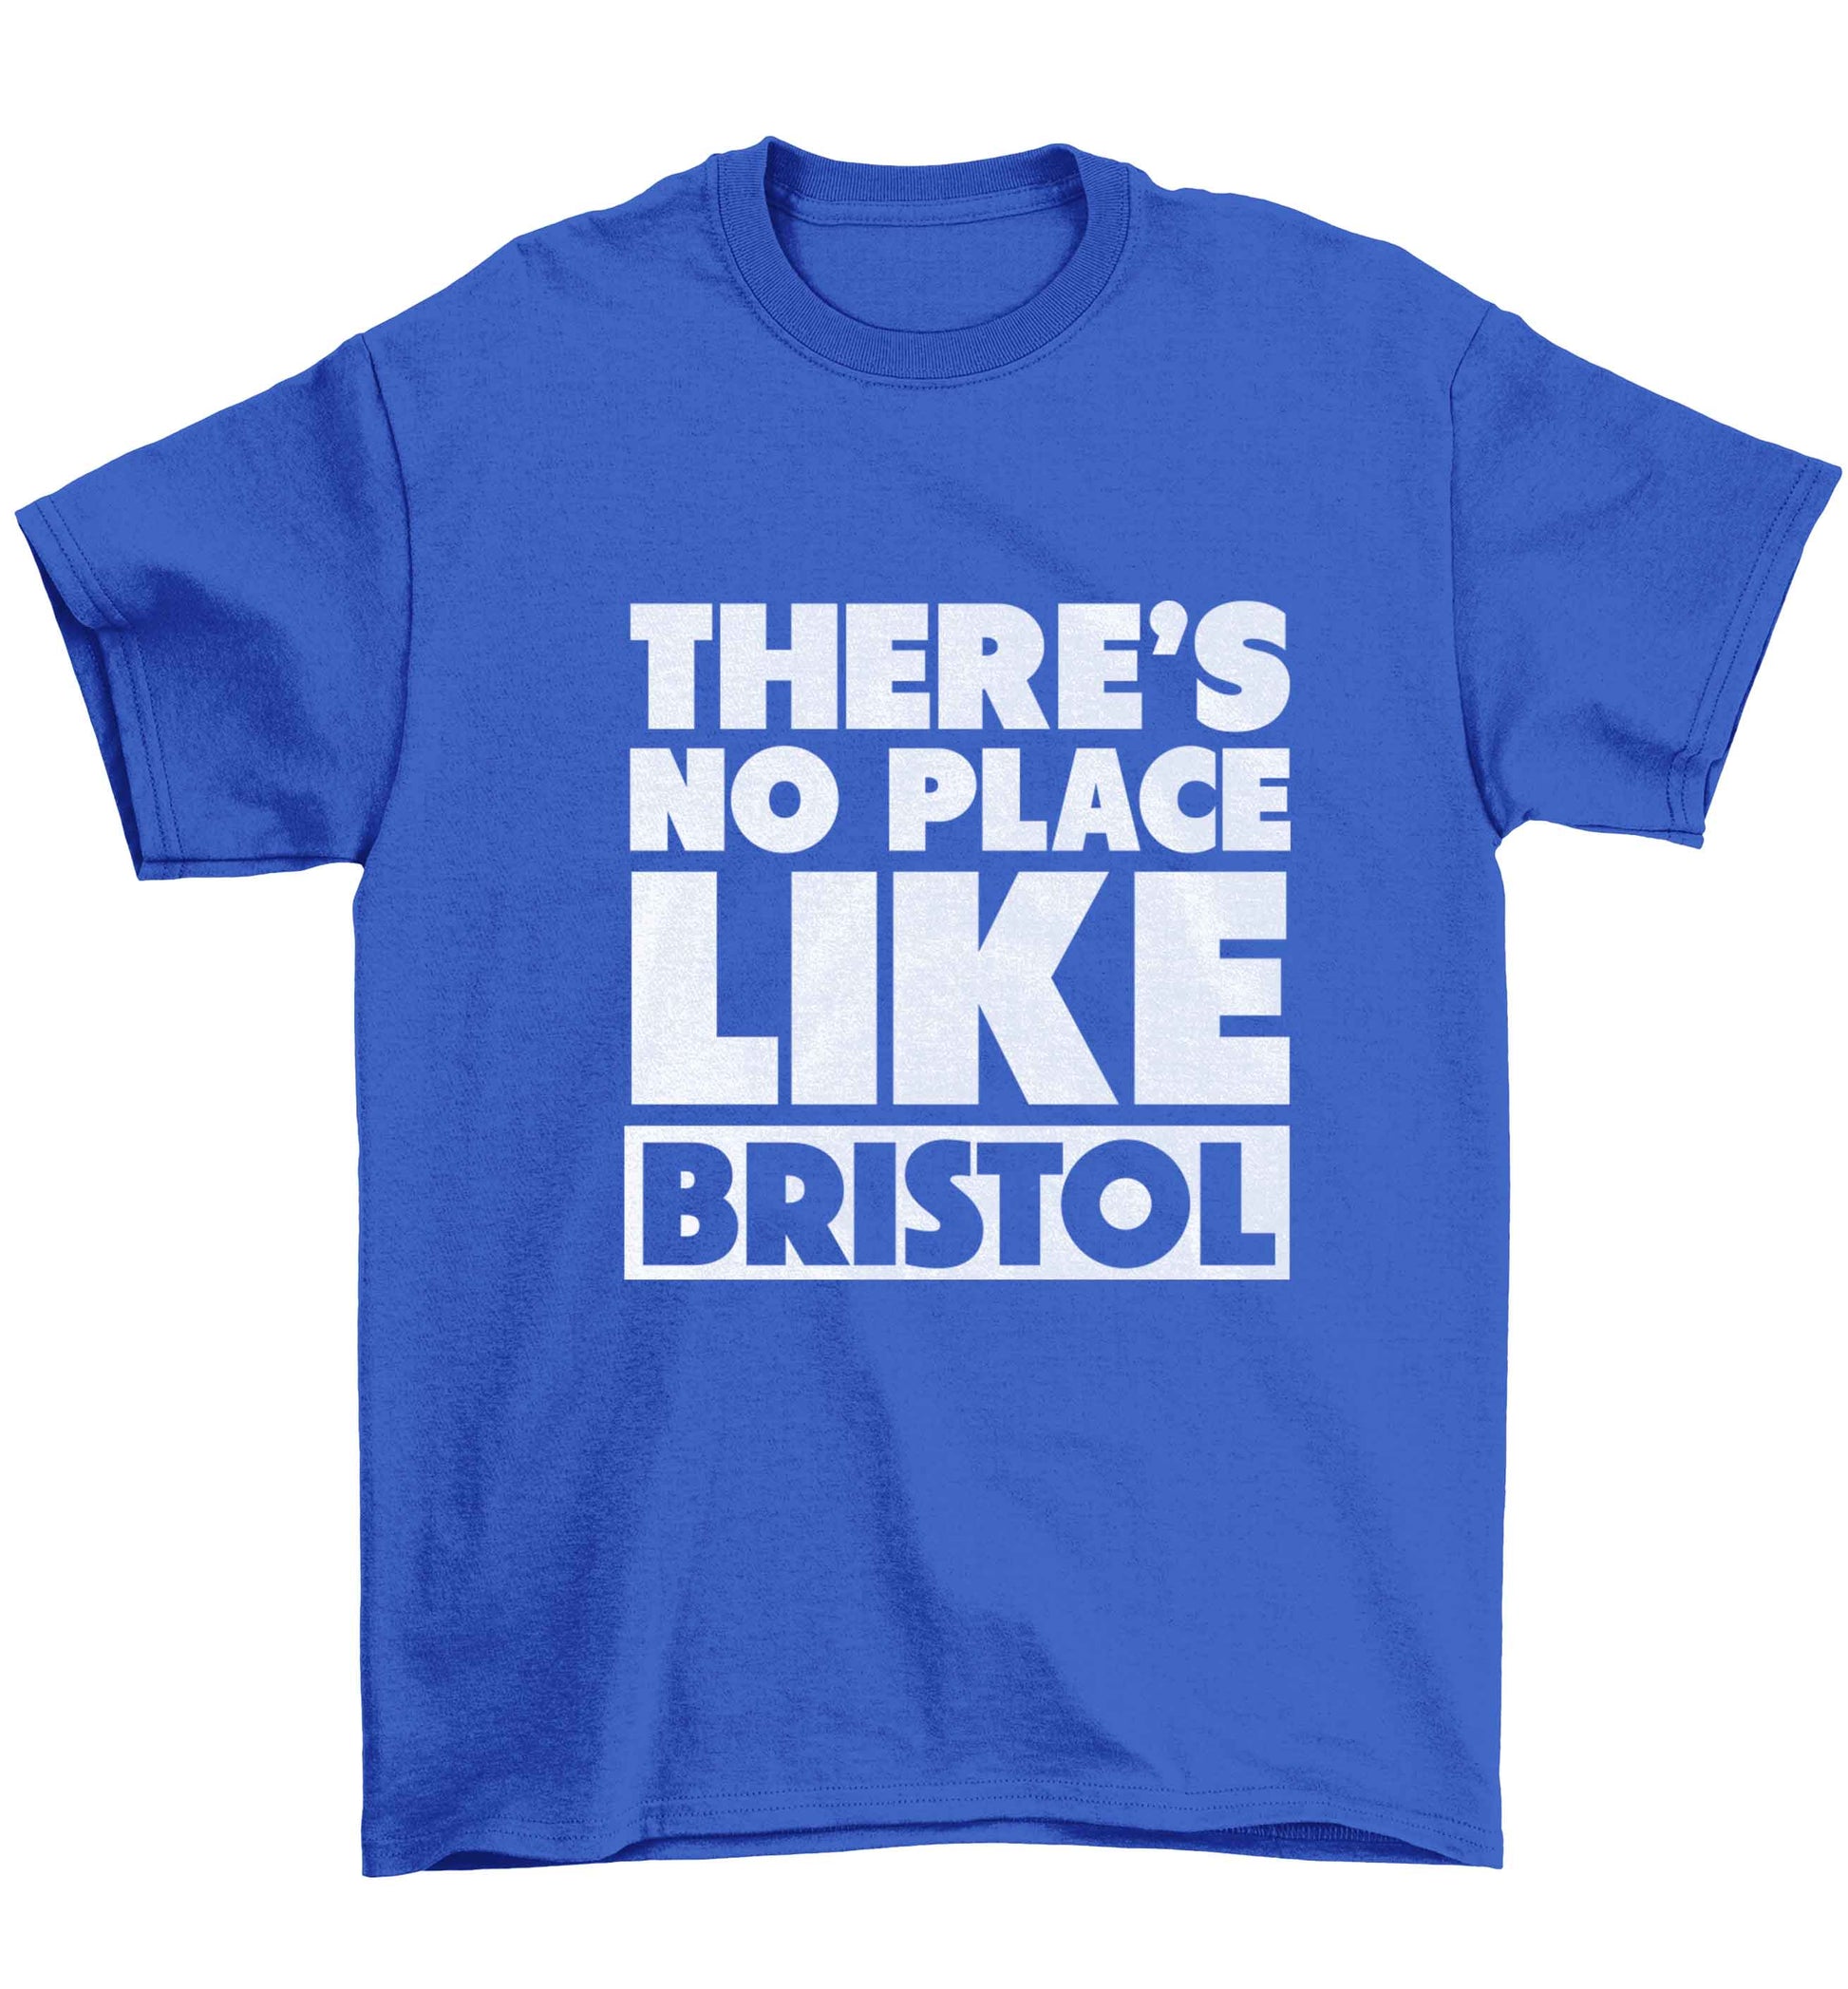 There's no place like Bristol Children's blue Tshirt 12-13 Years